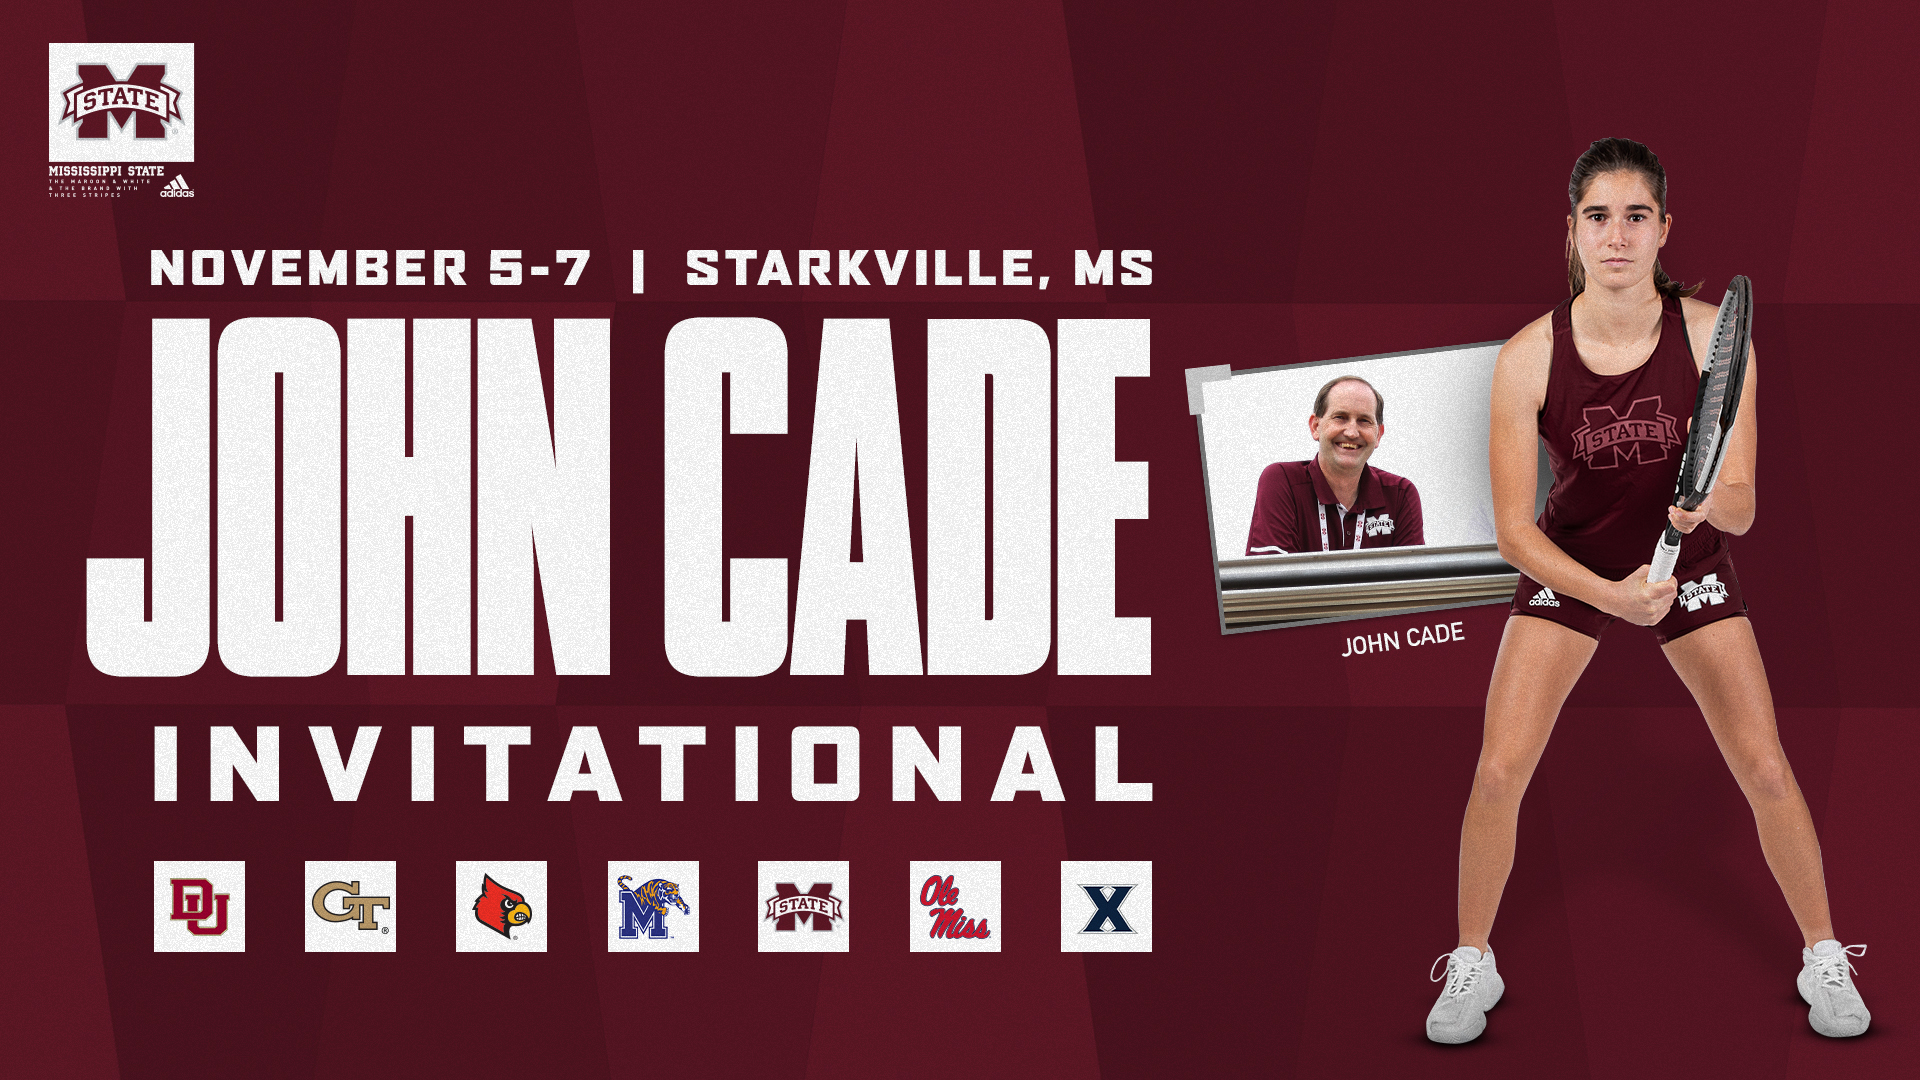 Maroon and white graphic promoting the John Cade Invitational hosted by MSU Women's Tennis